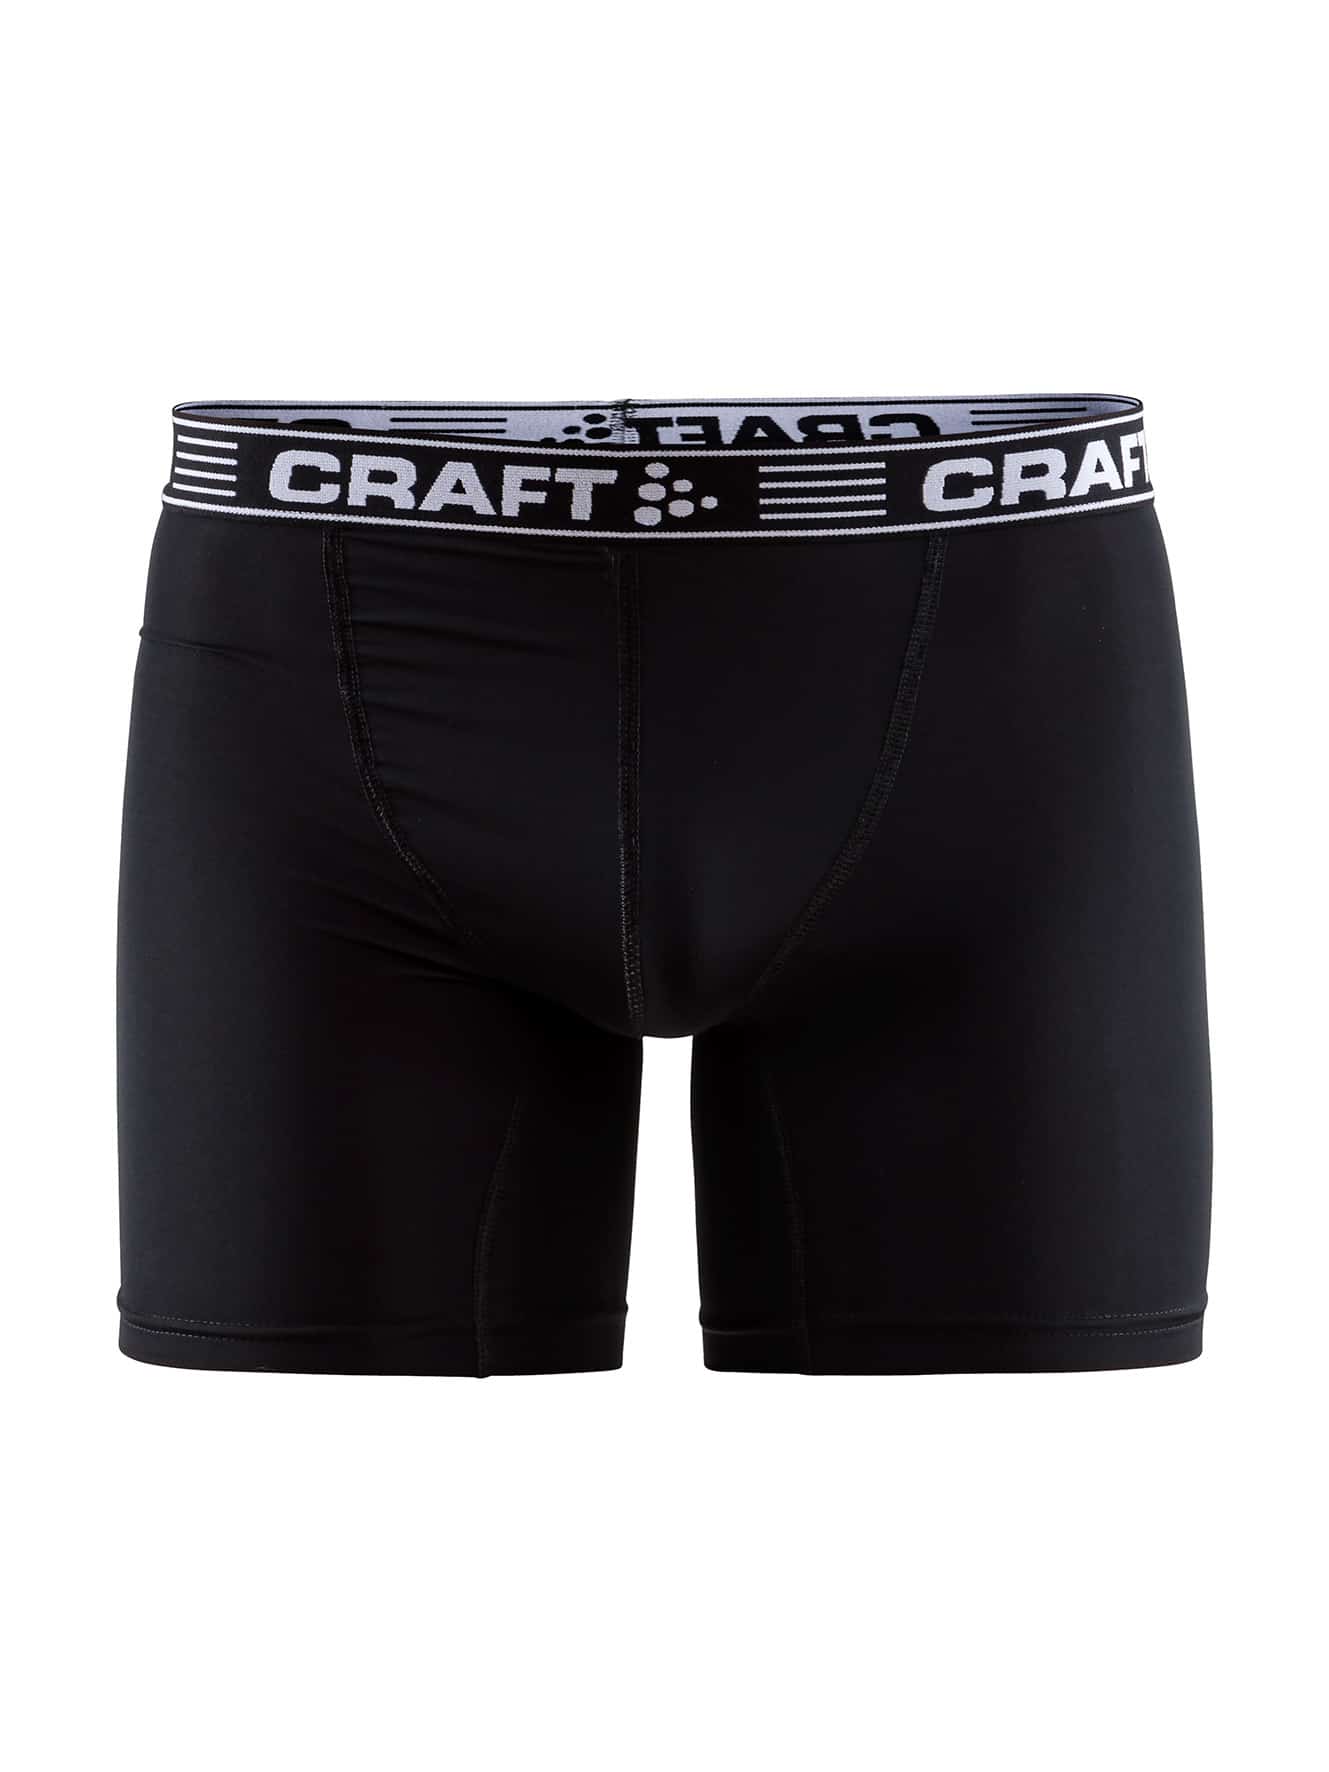 Craft - Greatness Boxer 6-Inch Maend - Black/White S